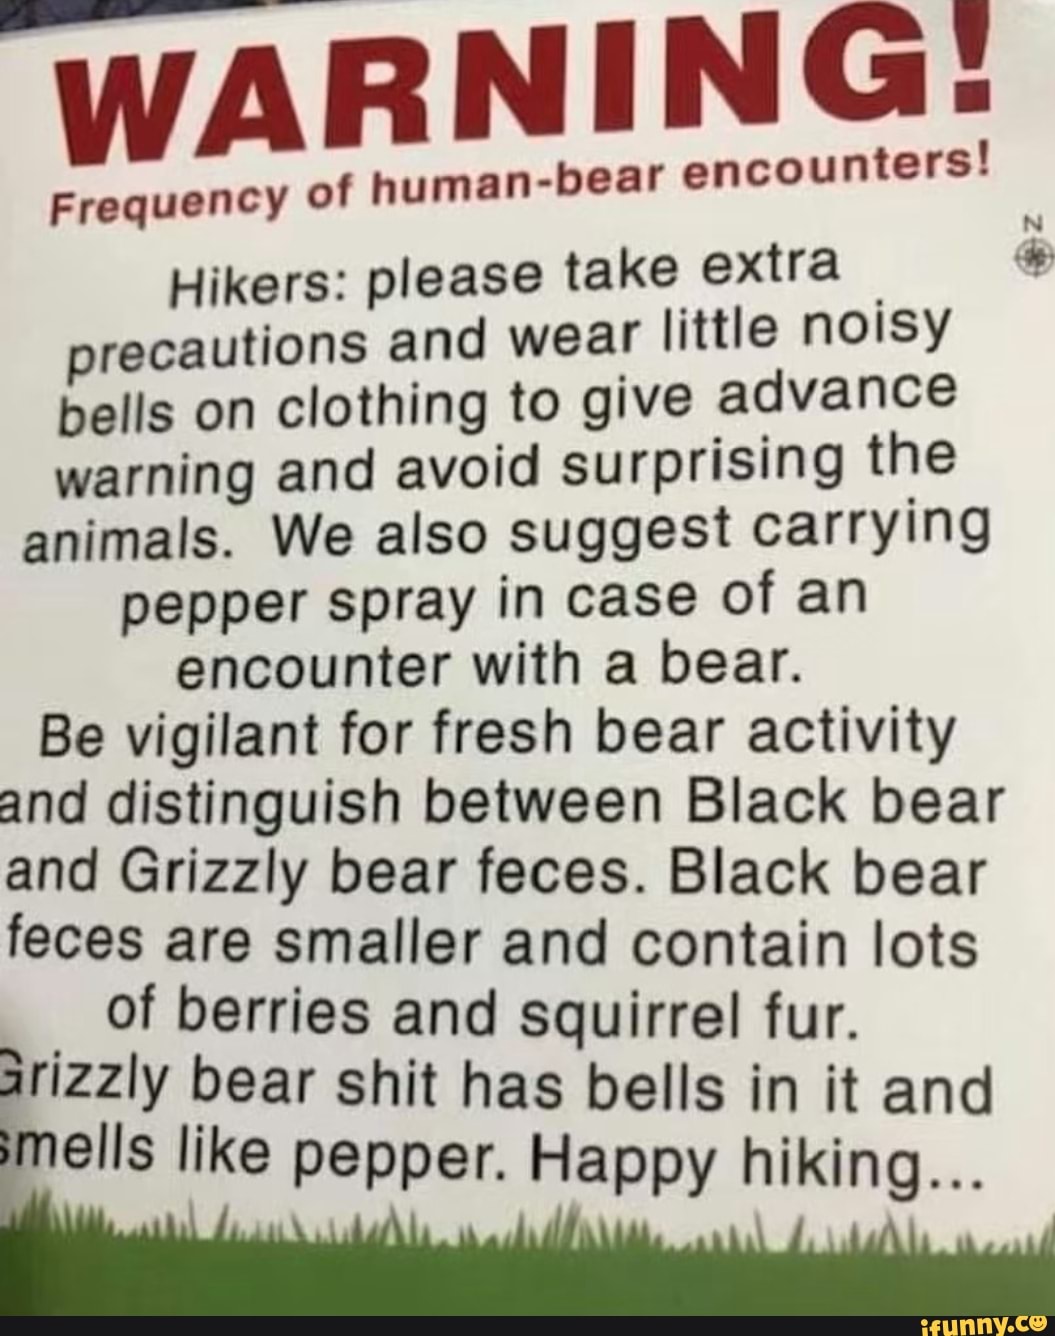 WARNING! Frequency of human- -bear encounters! Hikers: please take